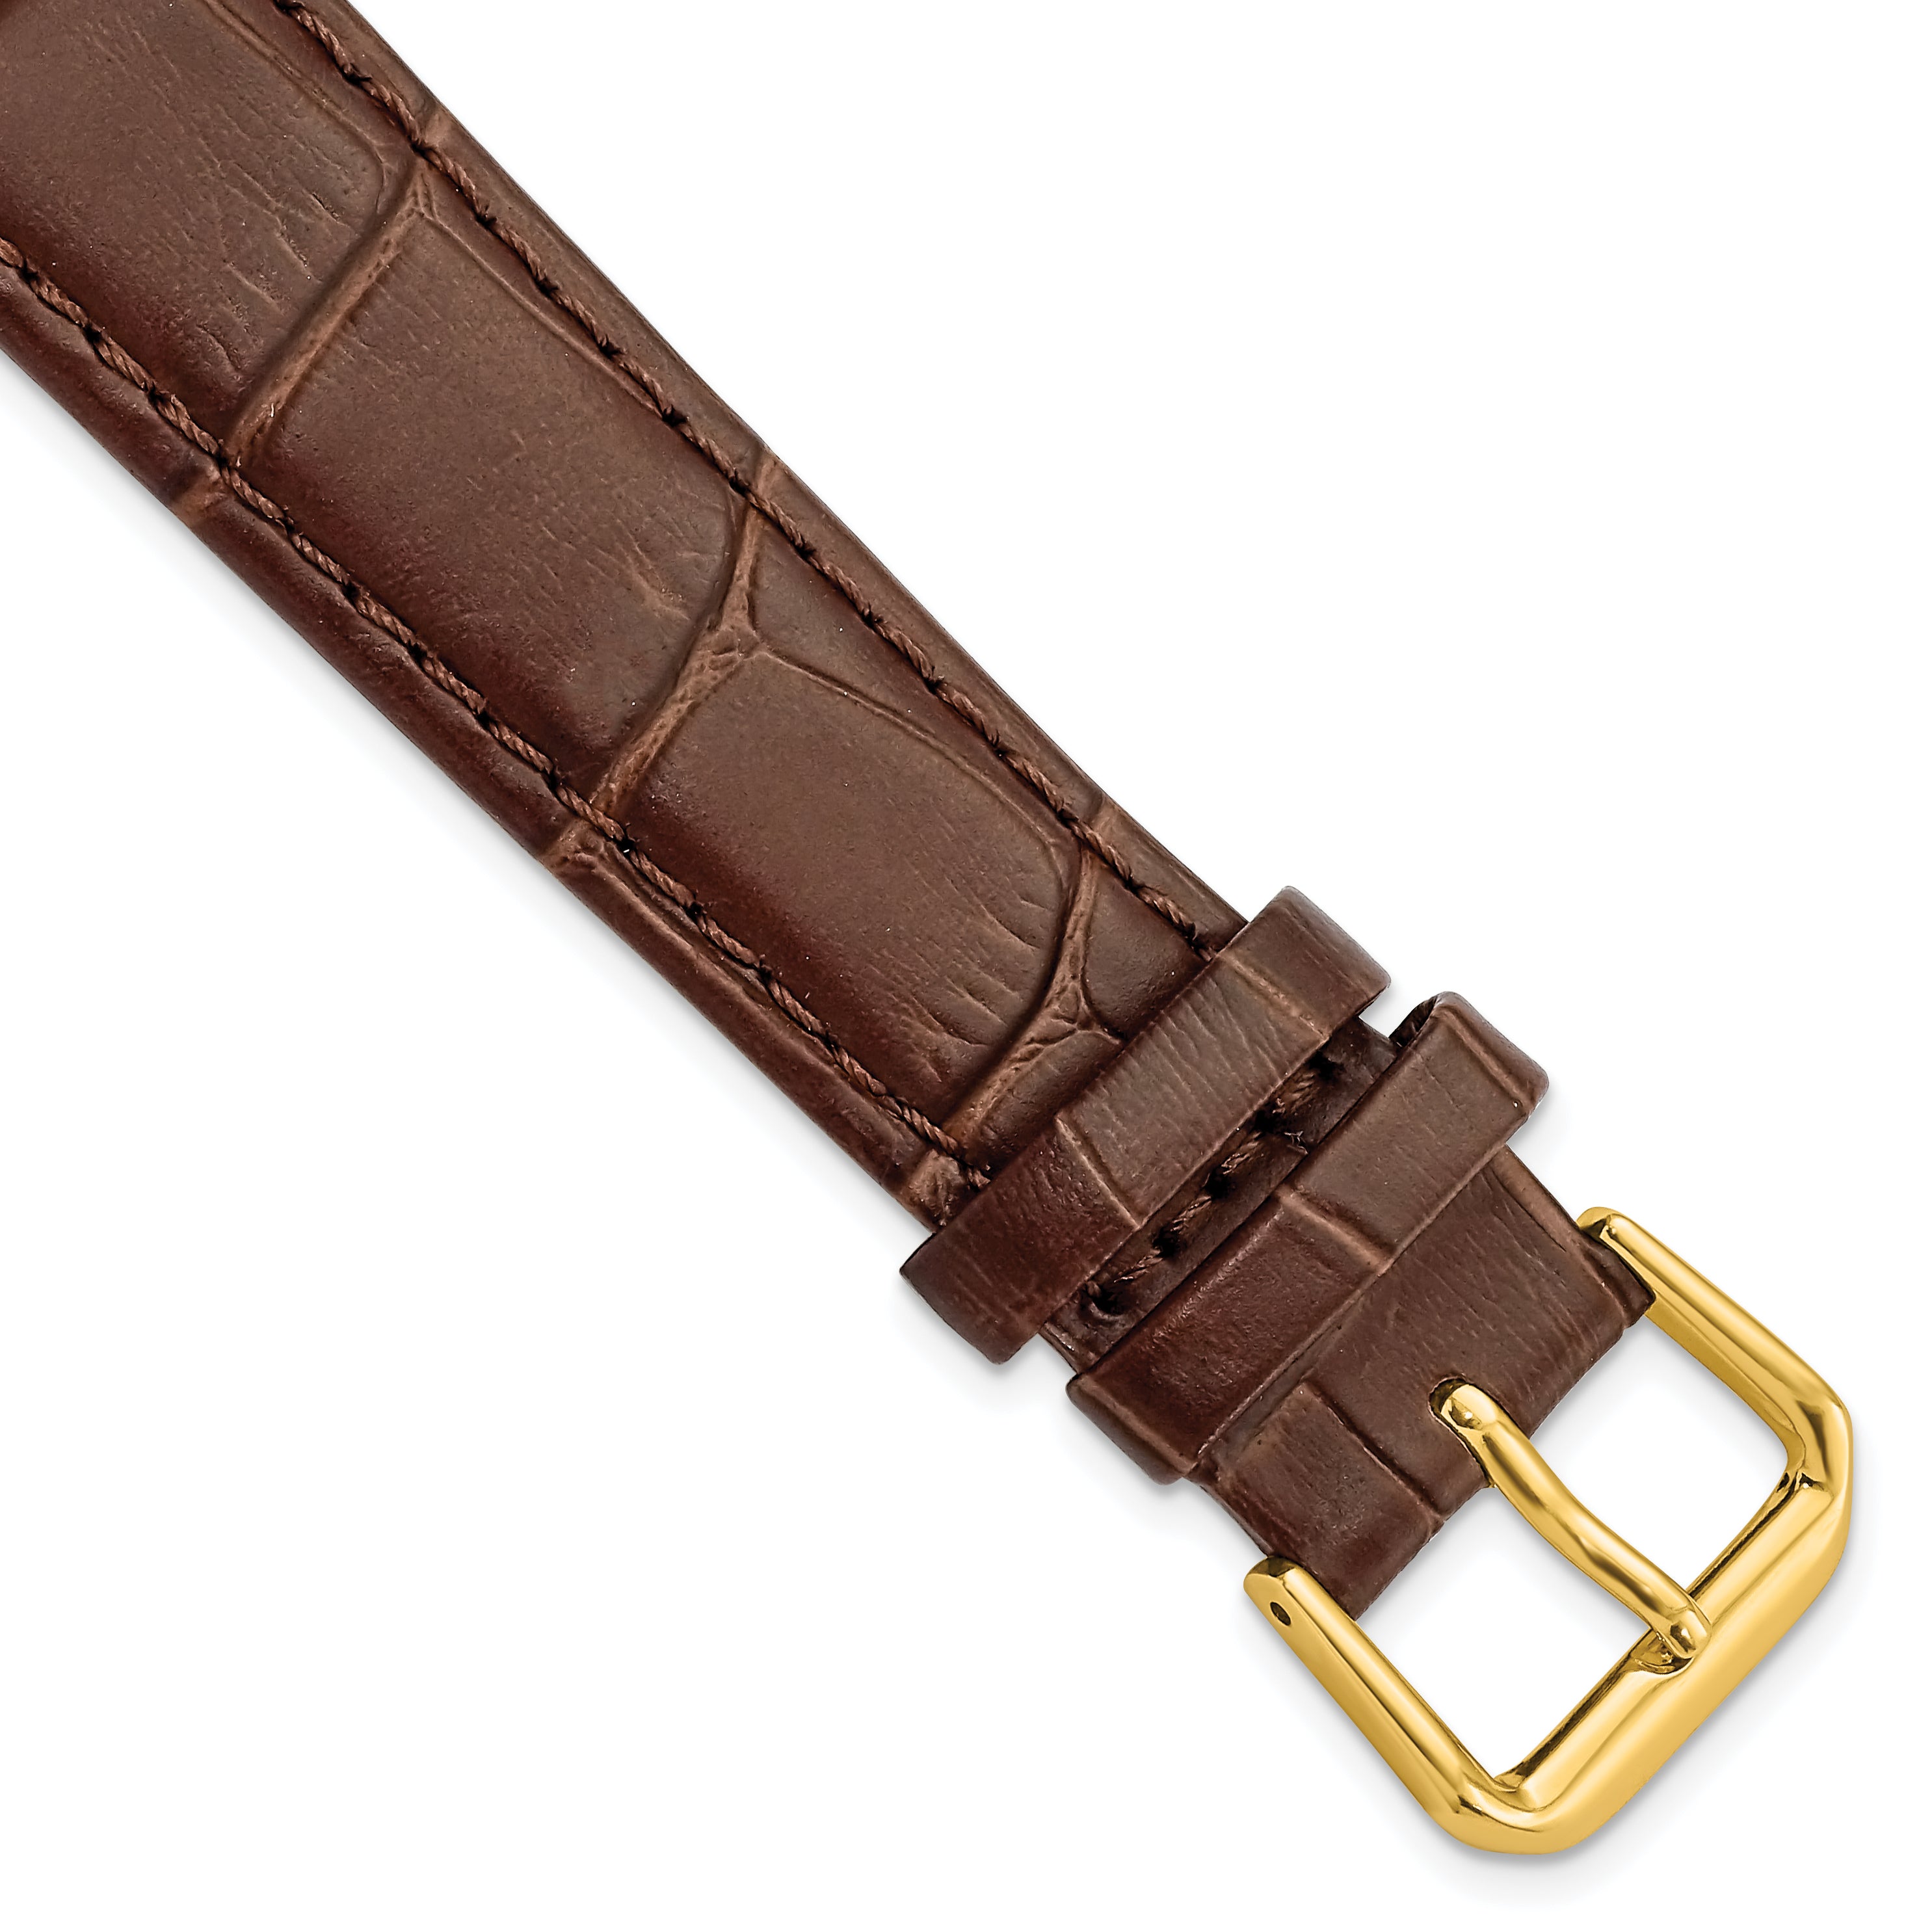 DeBeer 18mm Brown Matte Wild Alligator Grain Leather with Gold-tone Buckle 7.5 inch Watch Band